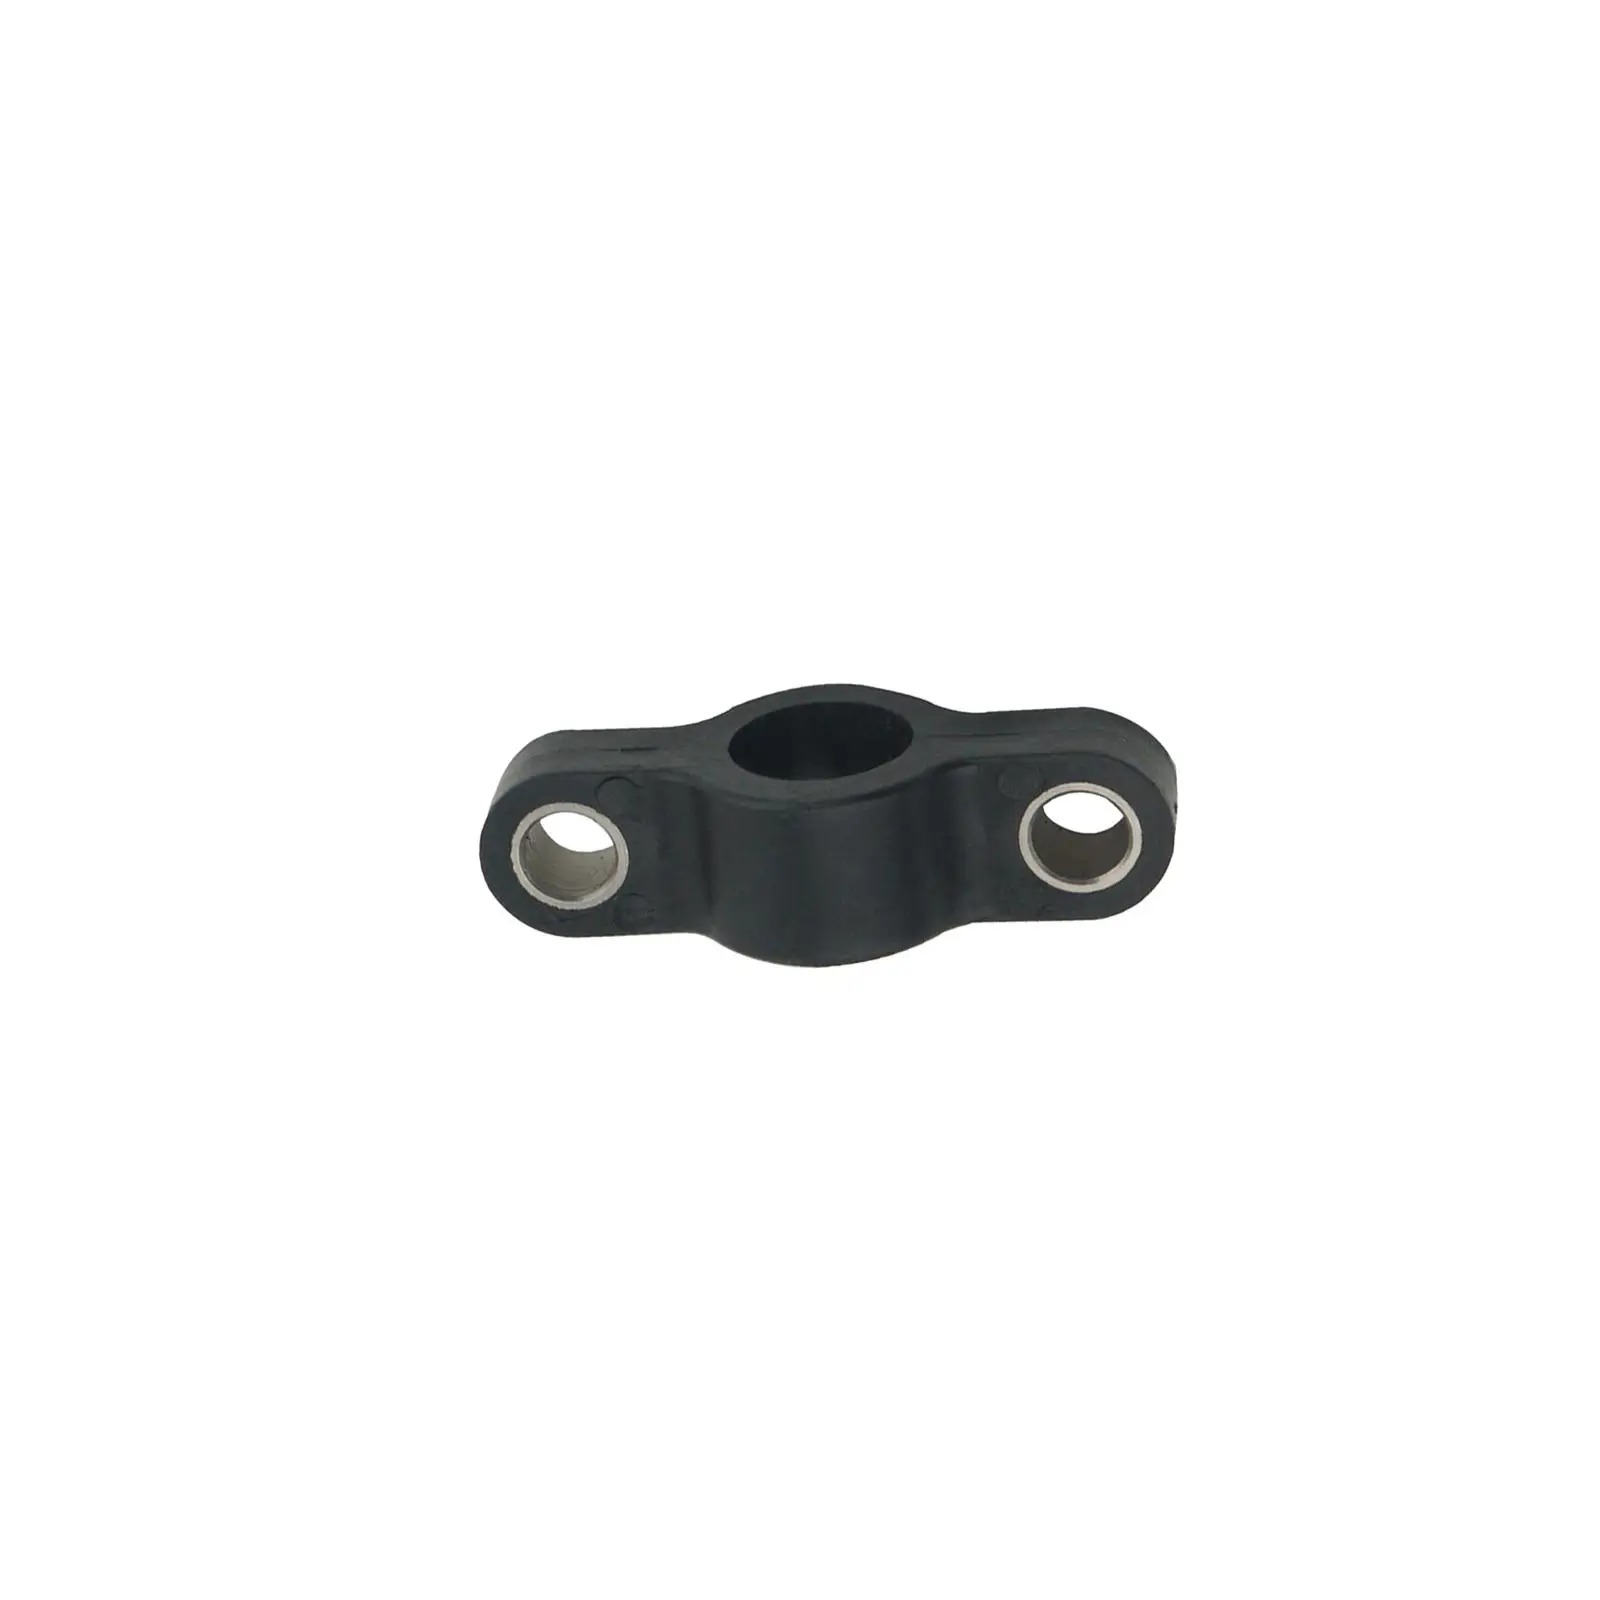 Bracket 6F5-41662 F15-05040002 for Parsun Engine Stable Performance Easily Install Replacement Vehicle Repair Parts